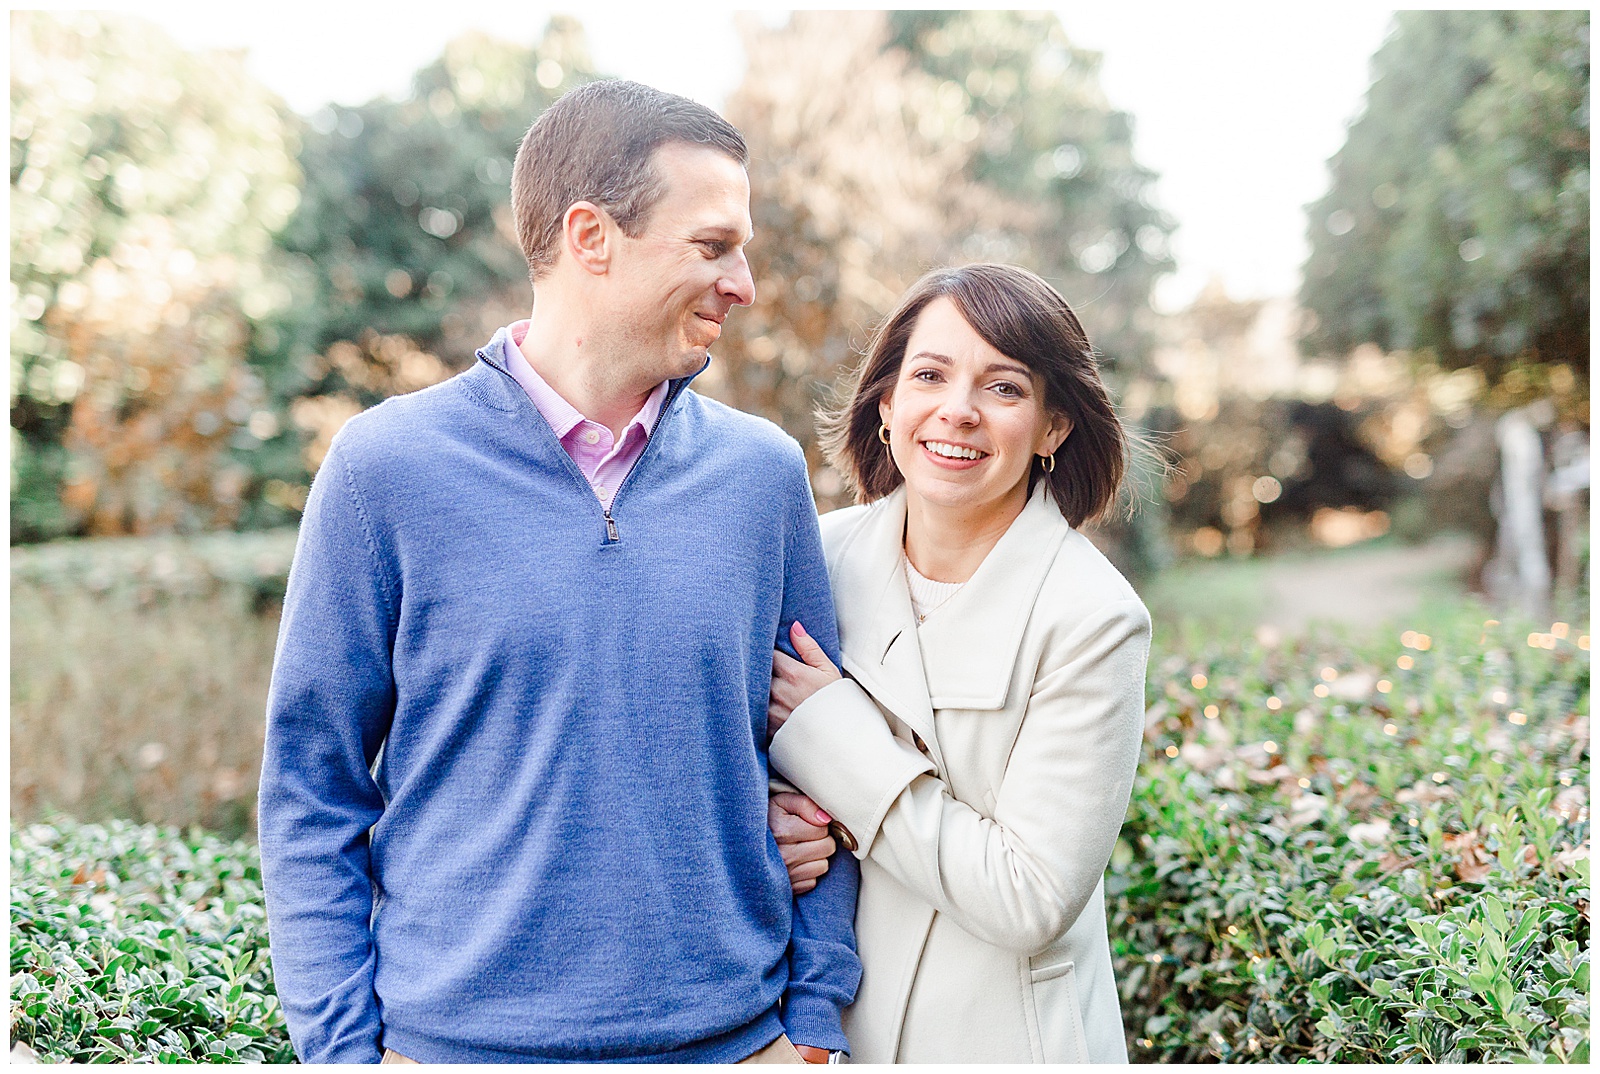 Sweet Couple Laughing in Park at Outdoor Winter Engagement Session in NC - white coat, short brown hair bride outfit ideas